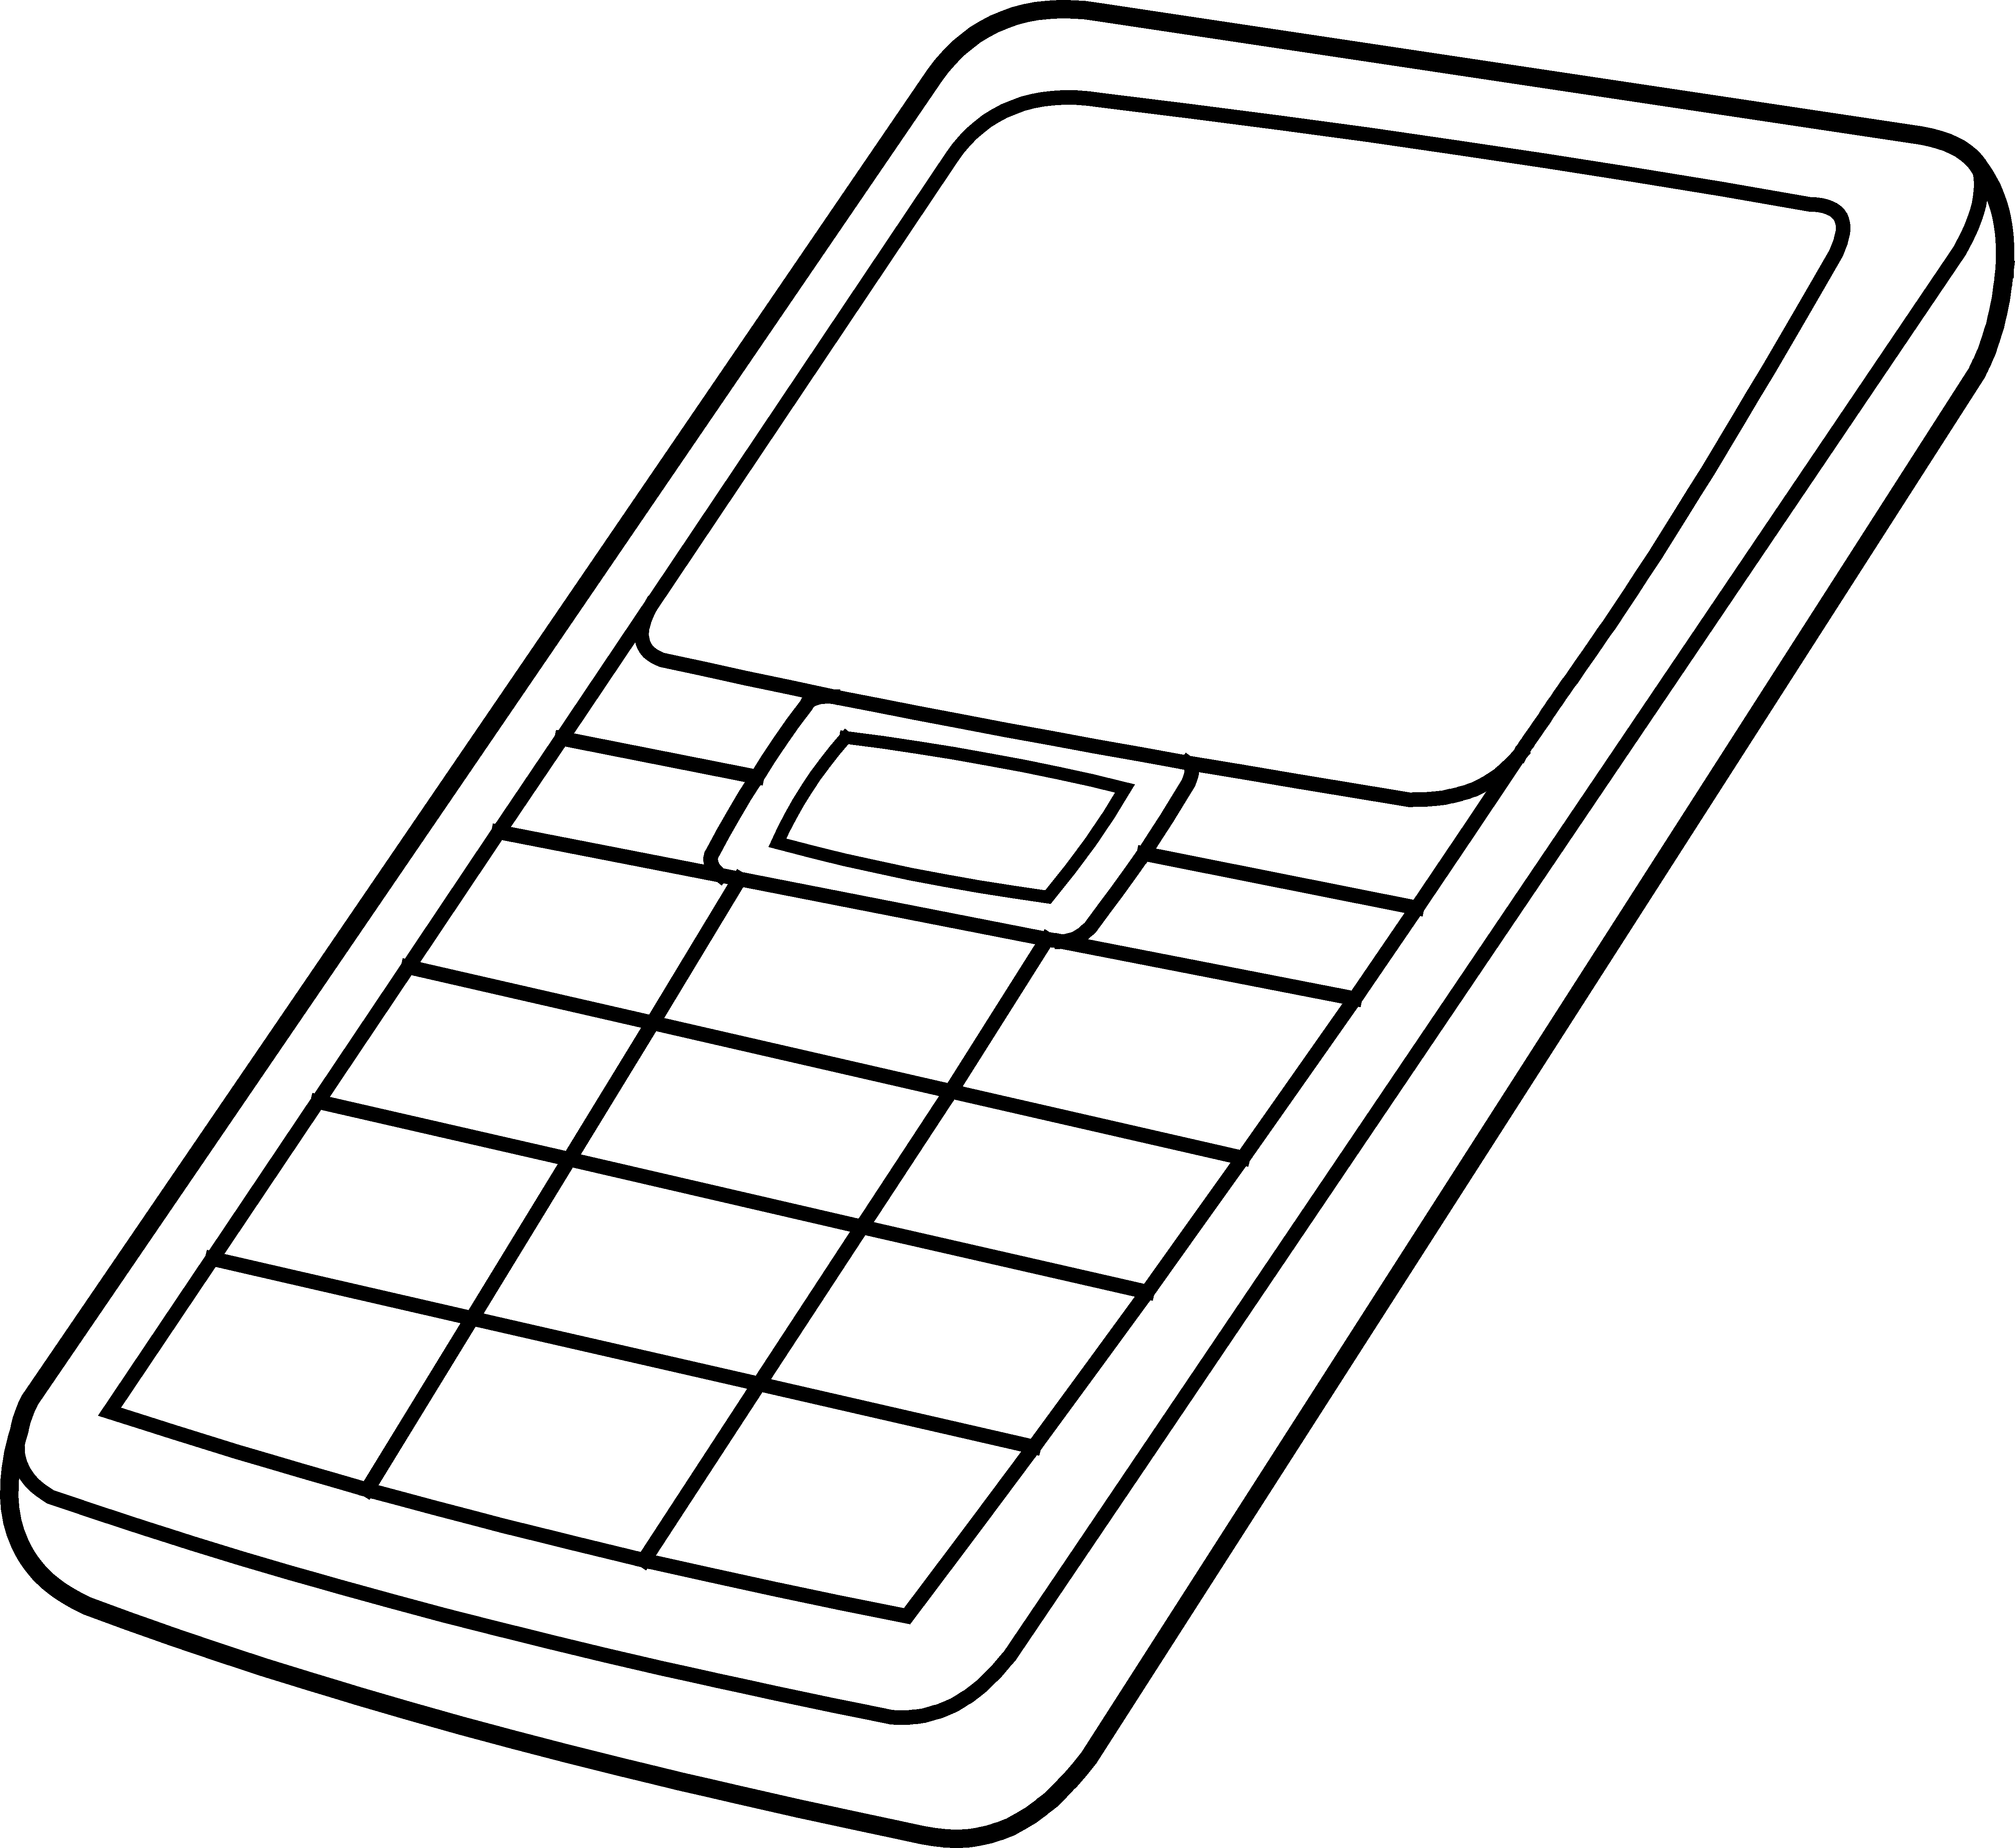 Mobile phone clipart black and white